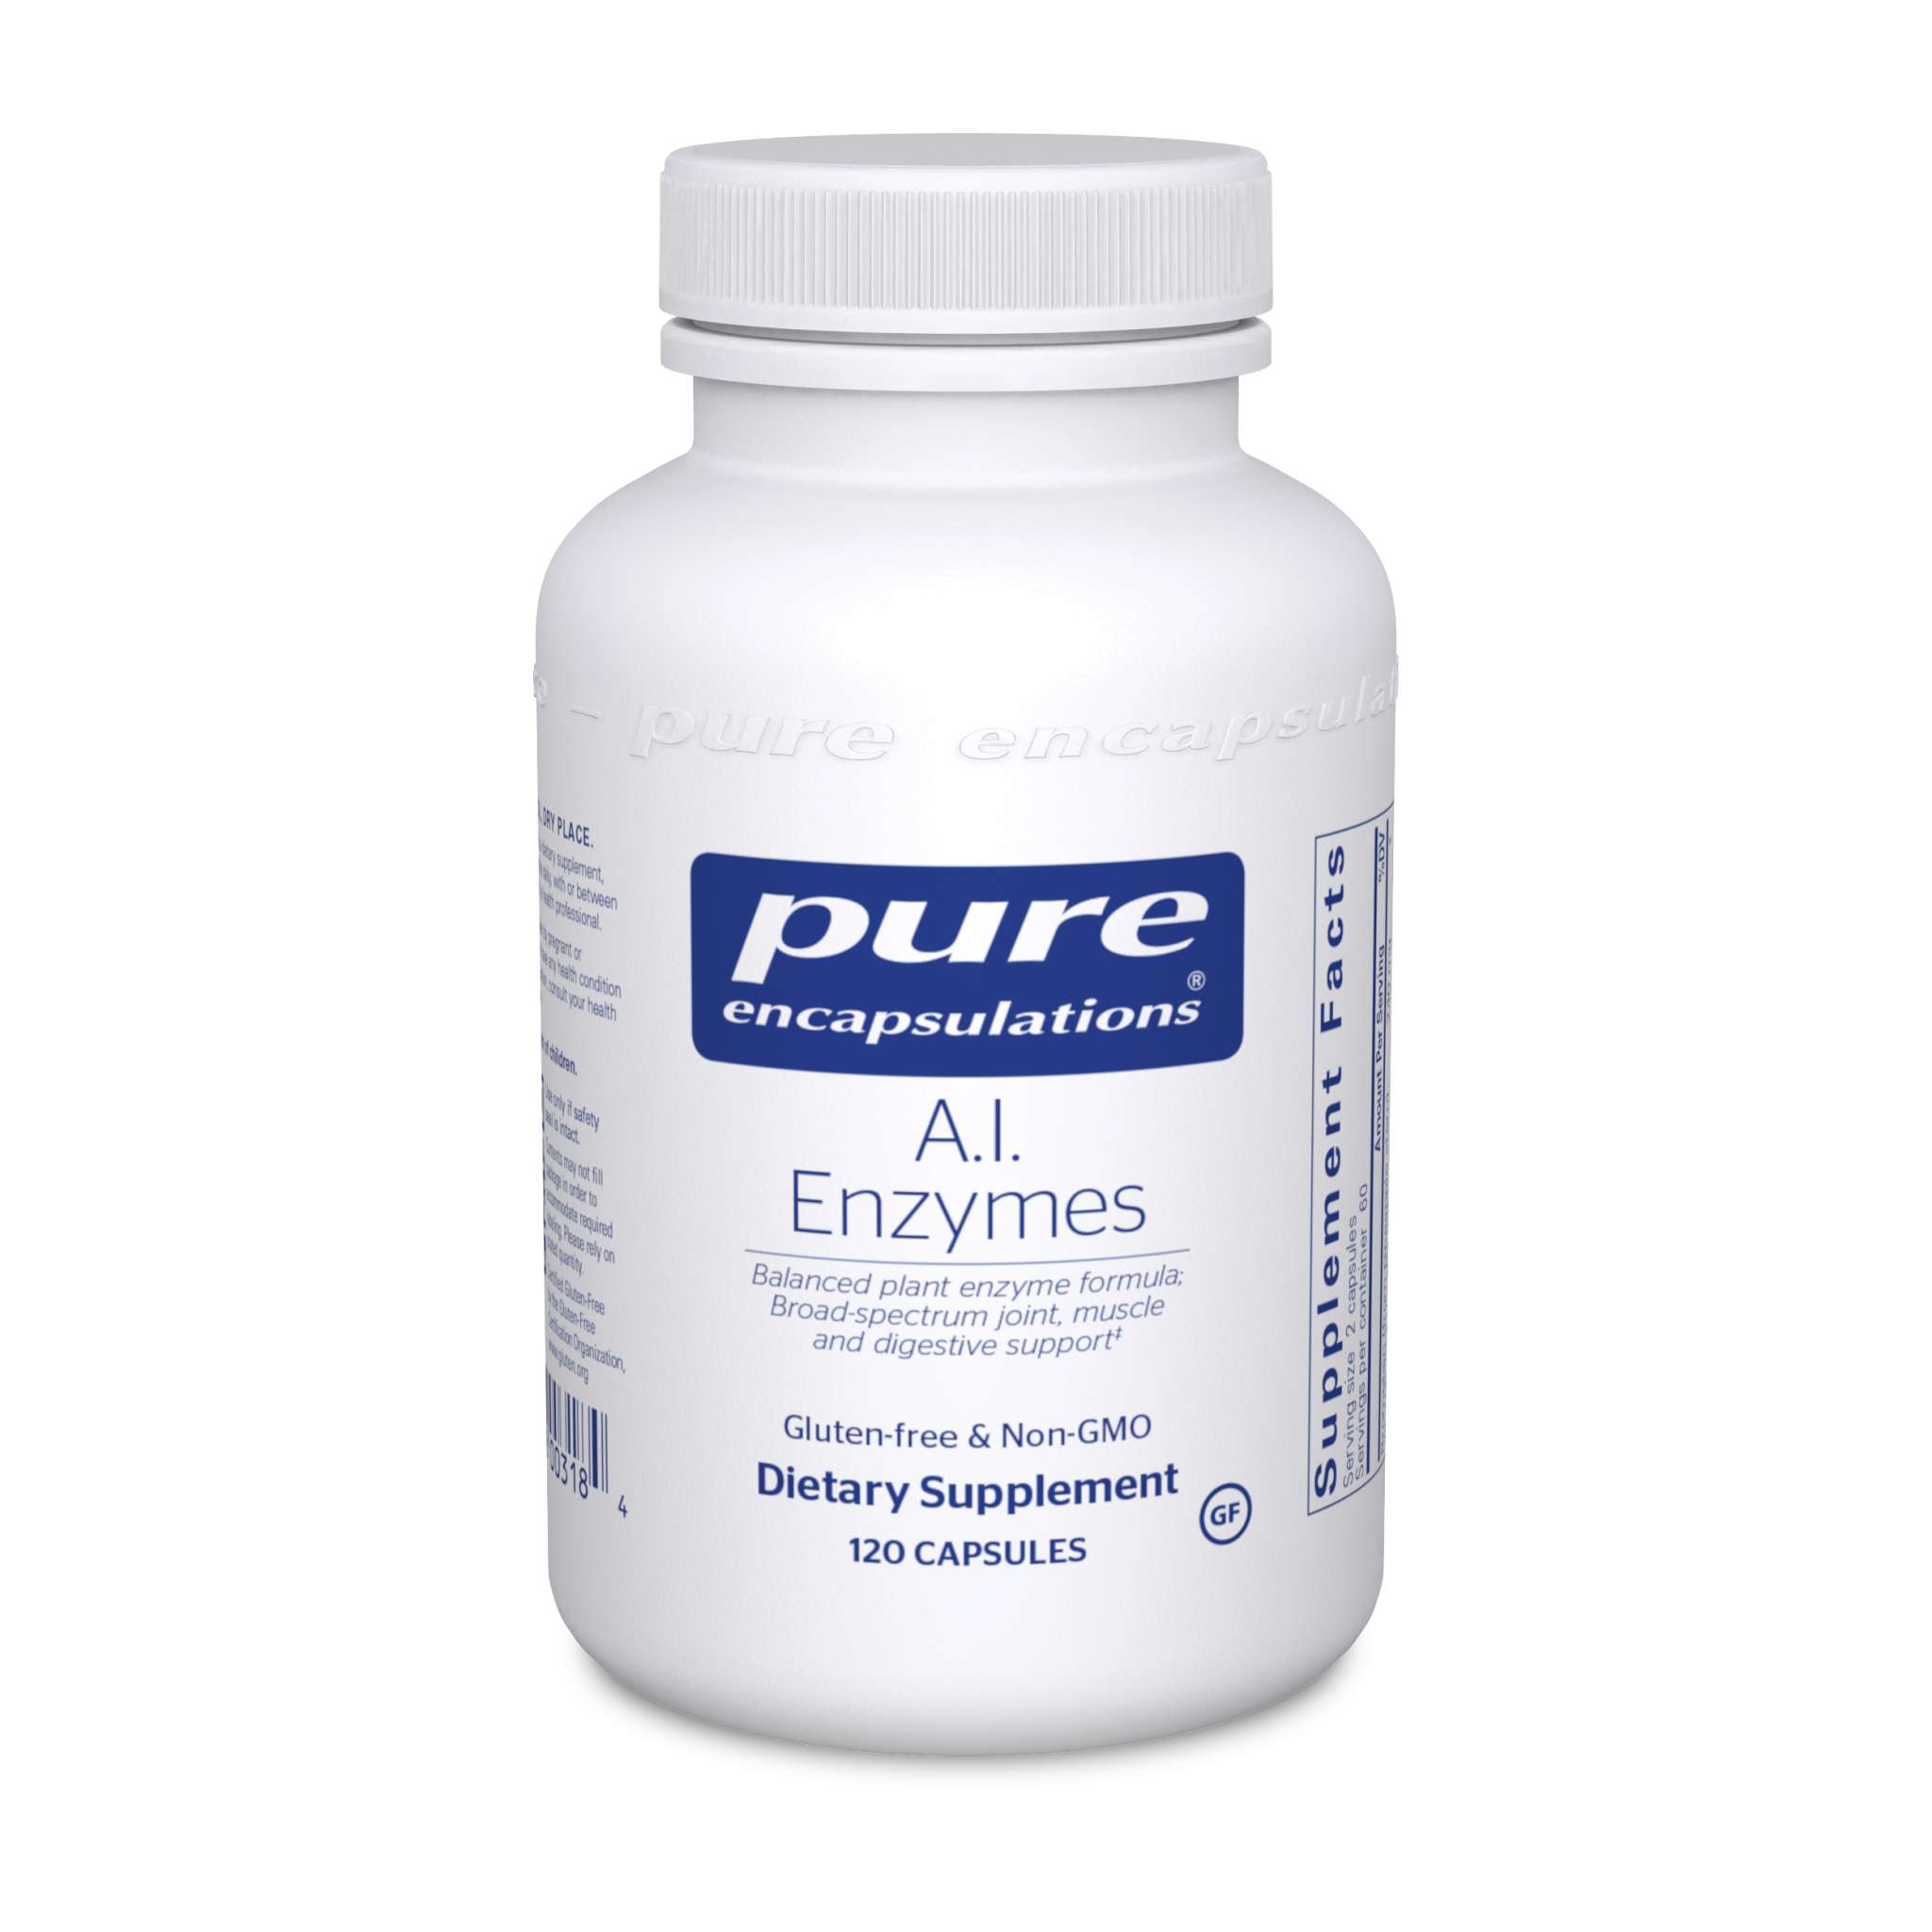 Pure Encapsulations - A I Enzymes